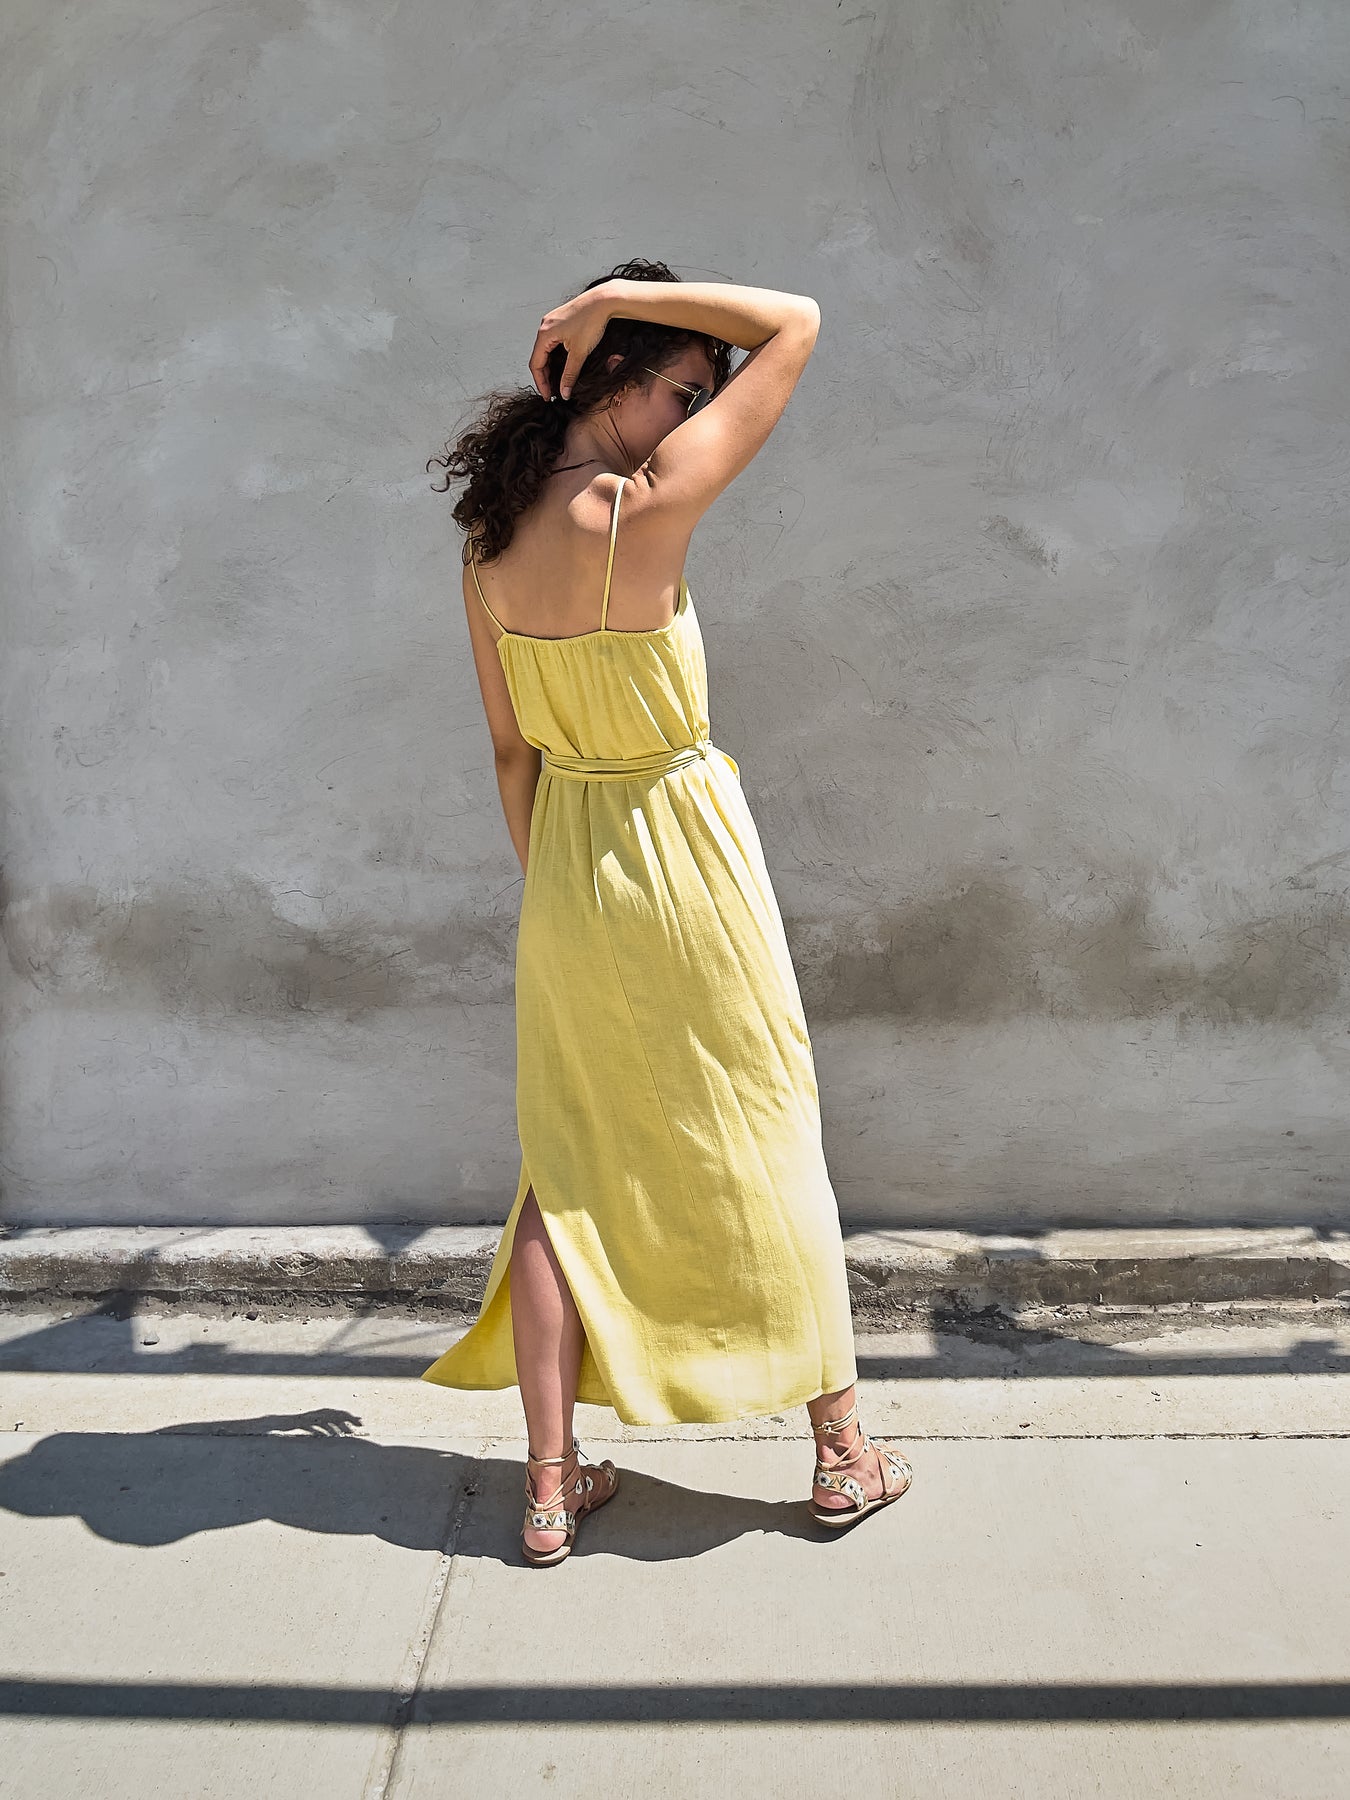 Winsome - An online shop for everyday elevated casual women's clothing